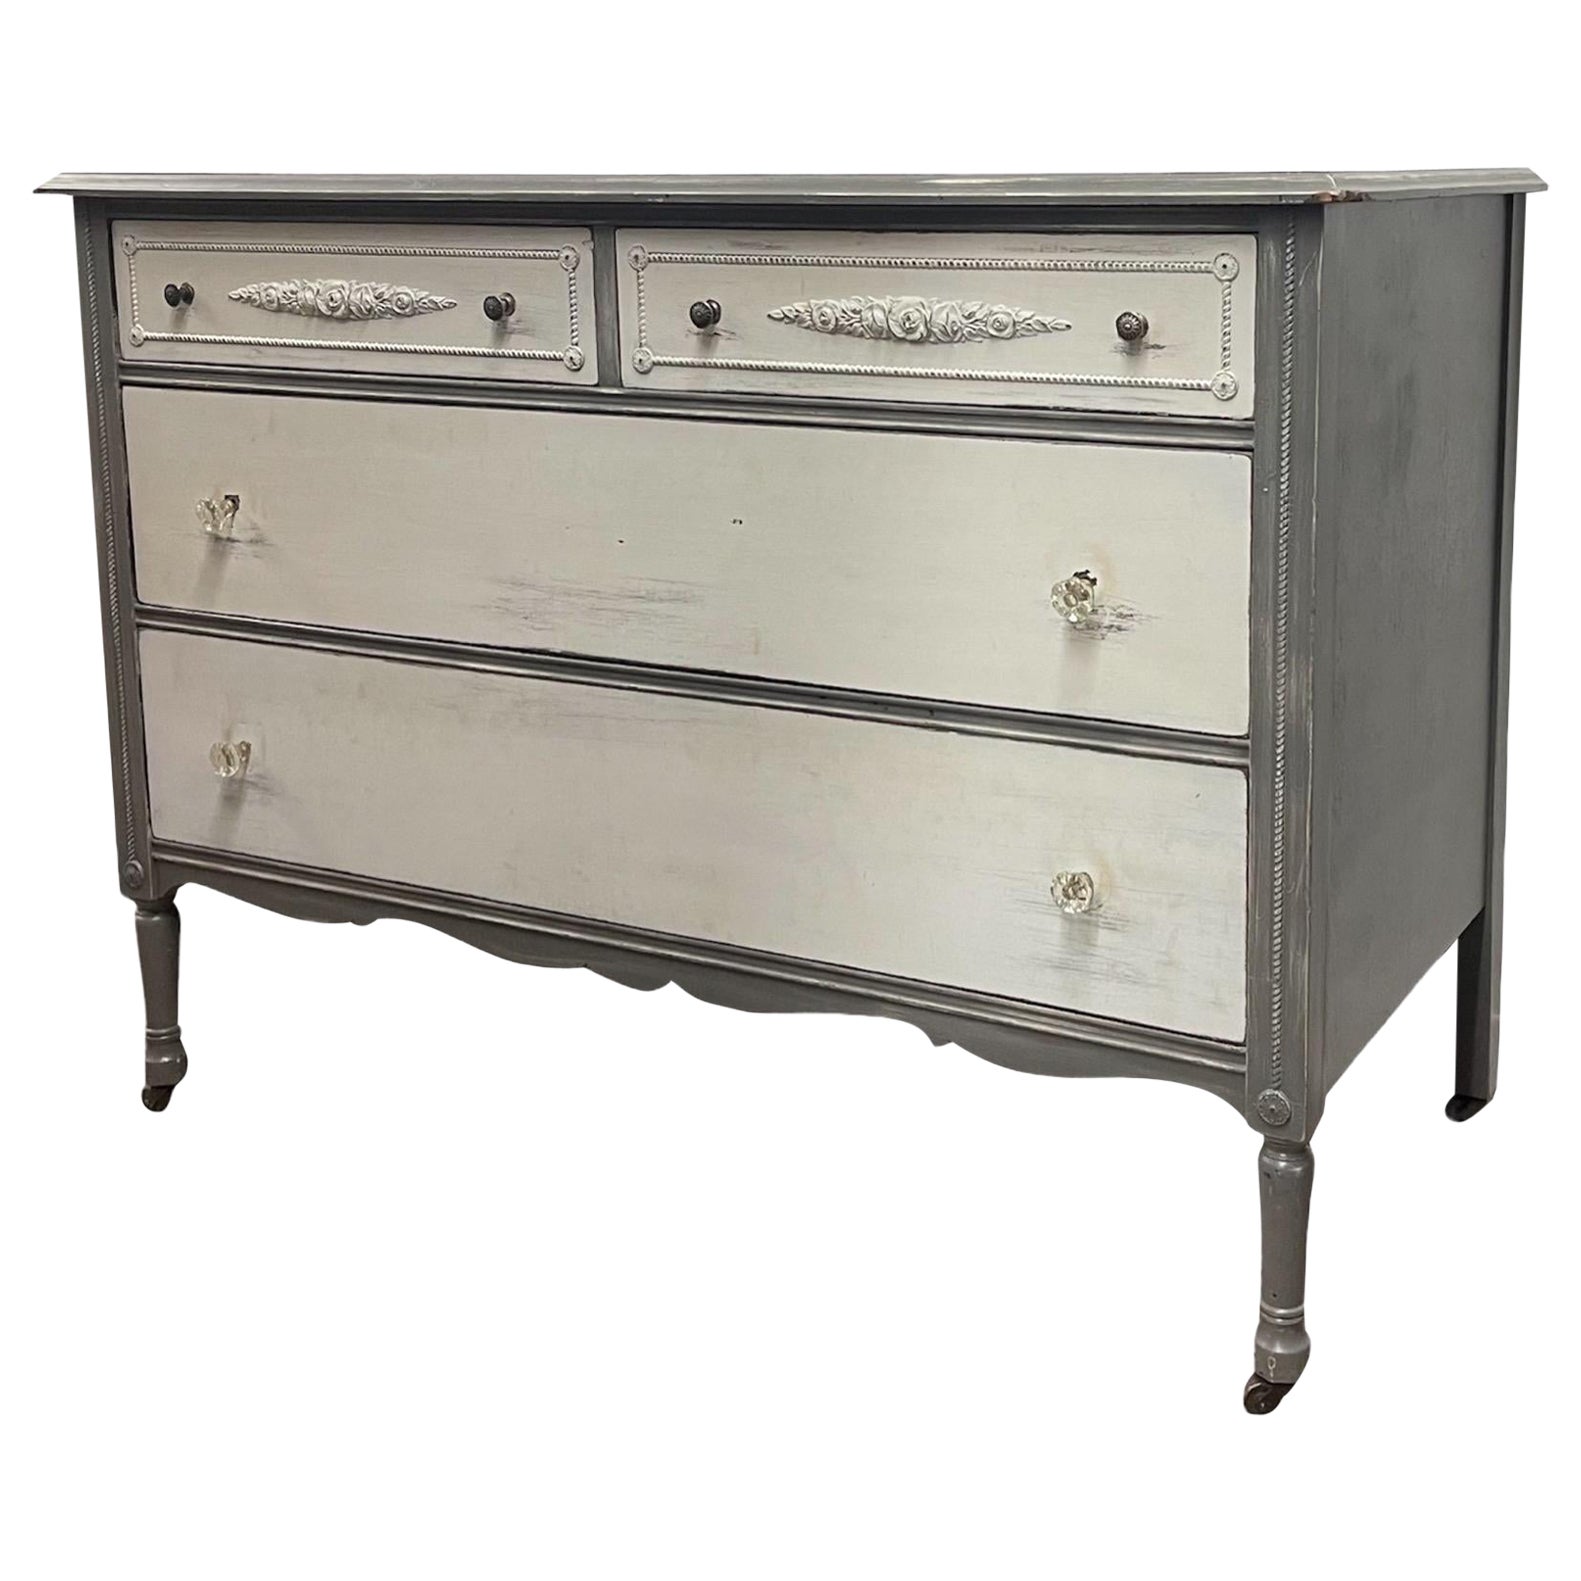 Antique Style Dresser Dovetail Drawers on Casters For Sale